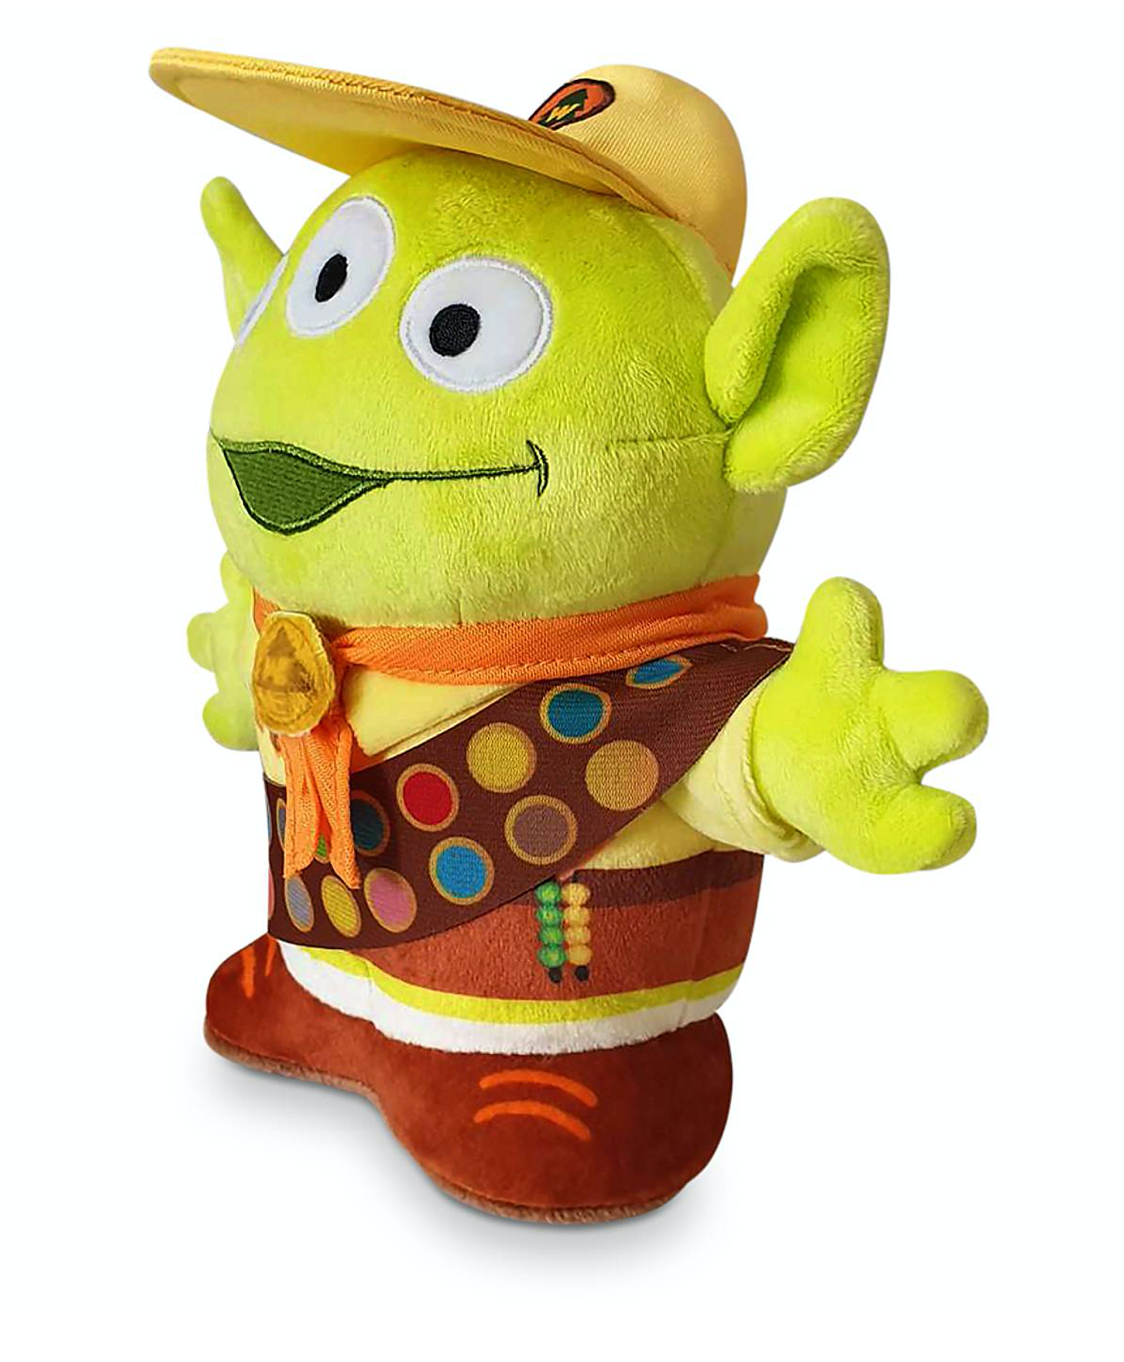 Disney Toy Story Alien Pixar Remix Plush Russell Limited New with Tag